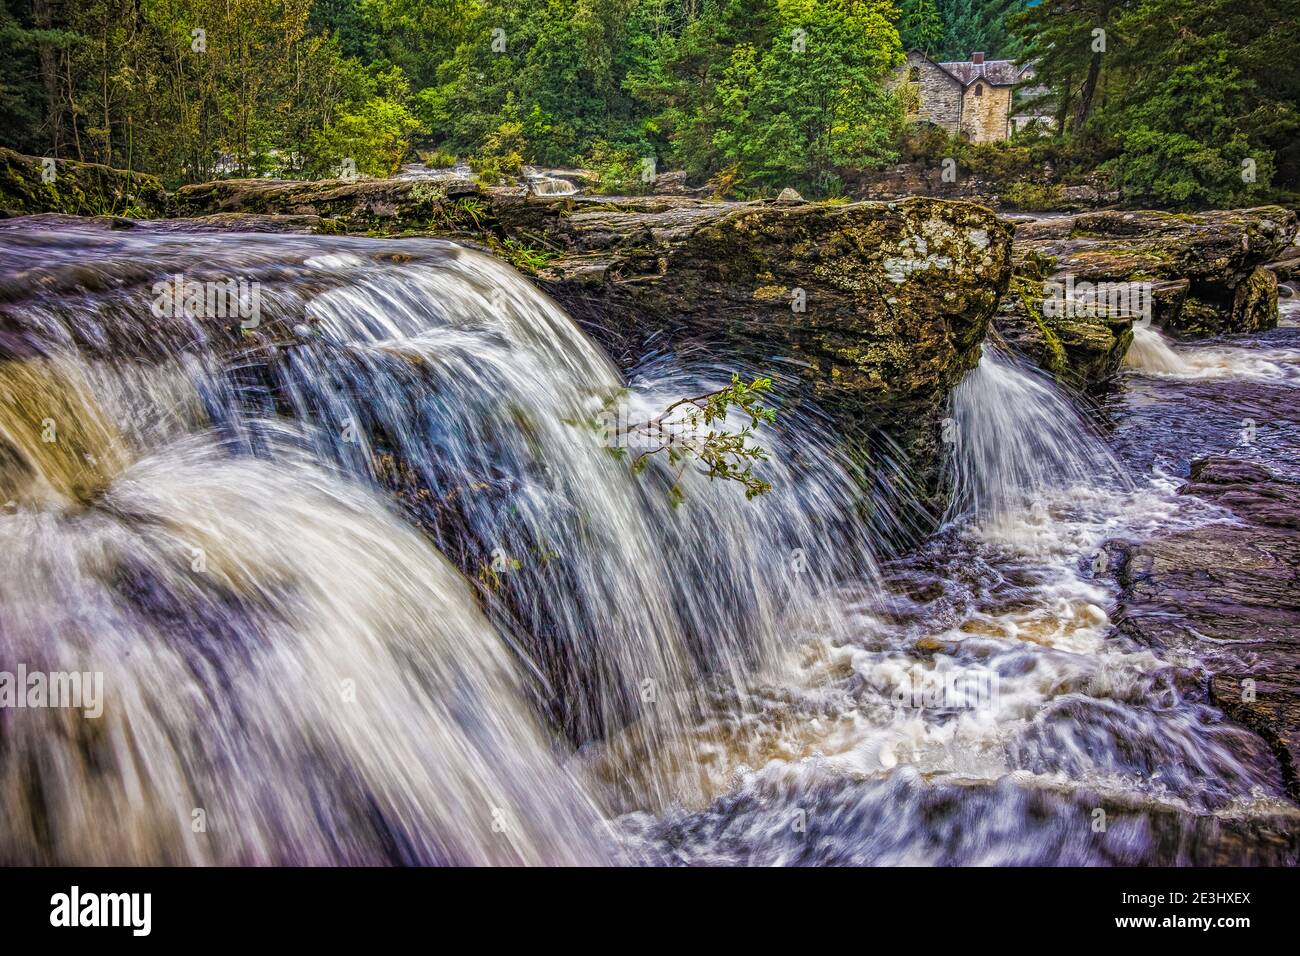 The Falls of Dochart are situated on the River Dochart at Killin in Stirling, Scotland at the western end of Loch Tay. A bridge crossing the river as Stock Photo